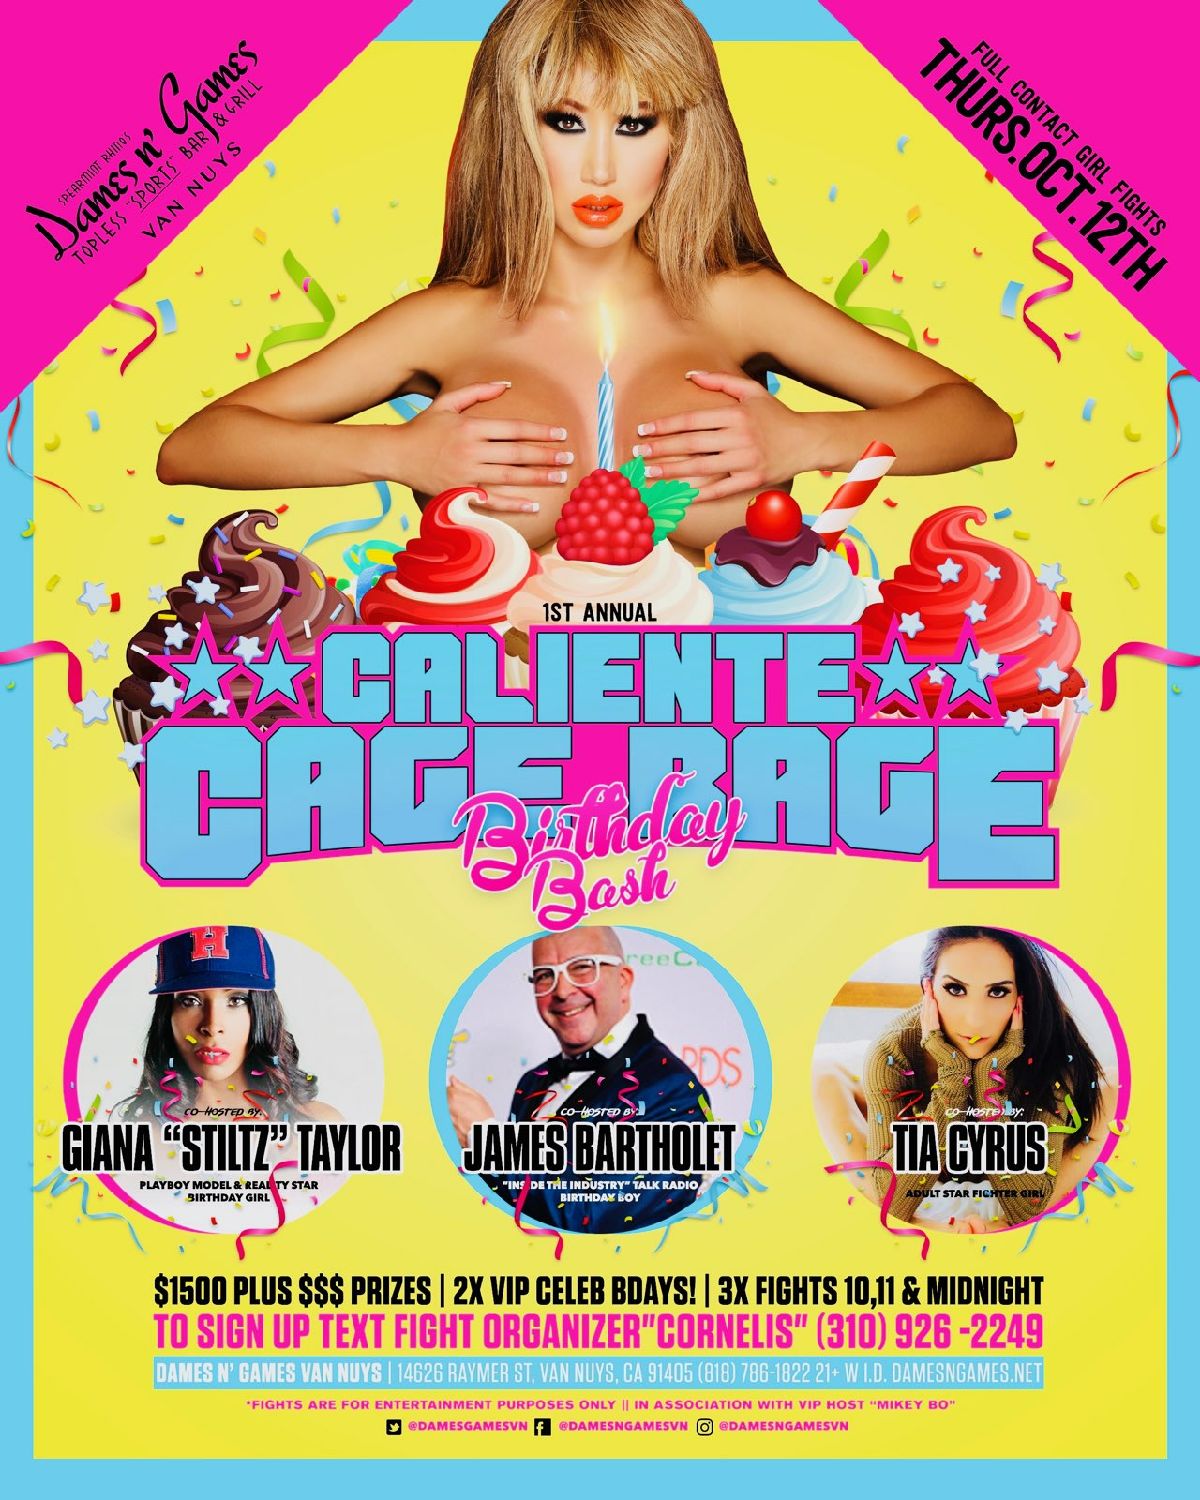 “Bartholet,Taylor, Banxx Birthday and Tia Cyrus fighting in Caliente Cage Rage at Dames N Games October 12th”